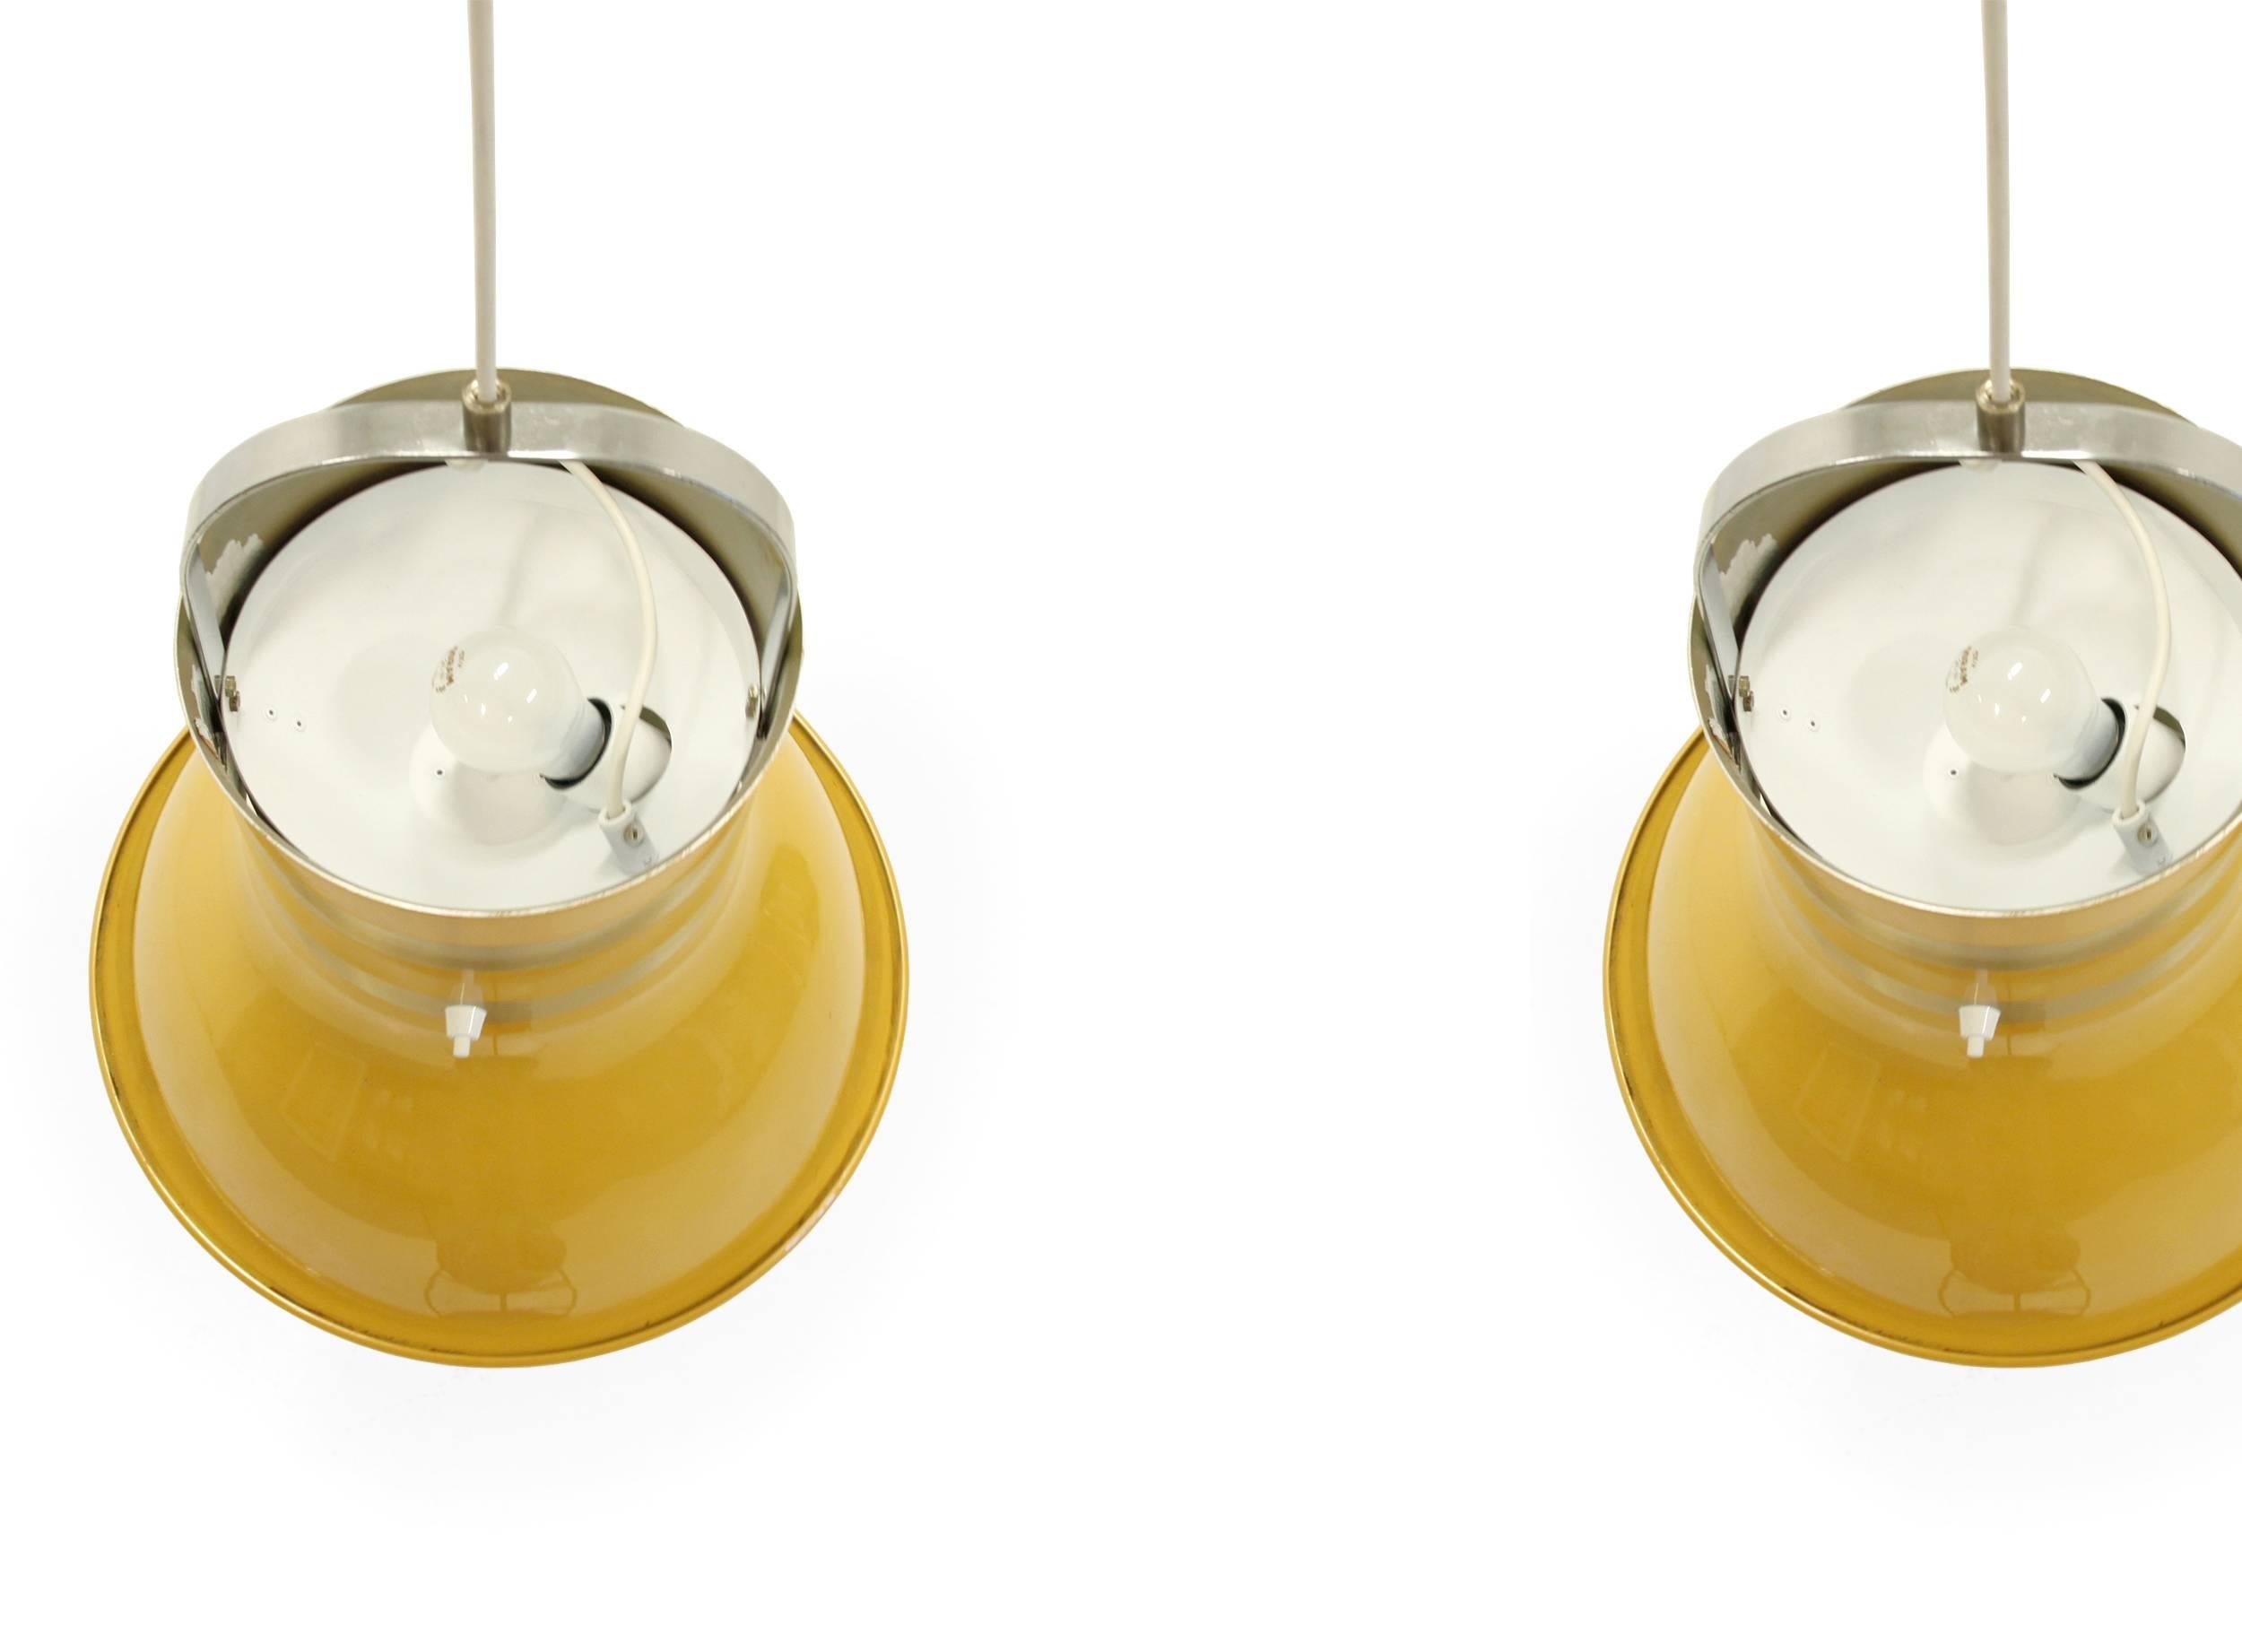 Aluminum Pair of Swedish Ceiling Lights by Per Sundstedt for Kosta, 1970s